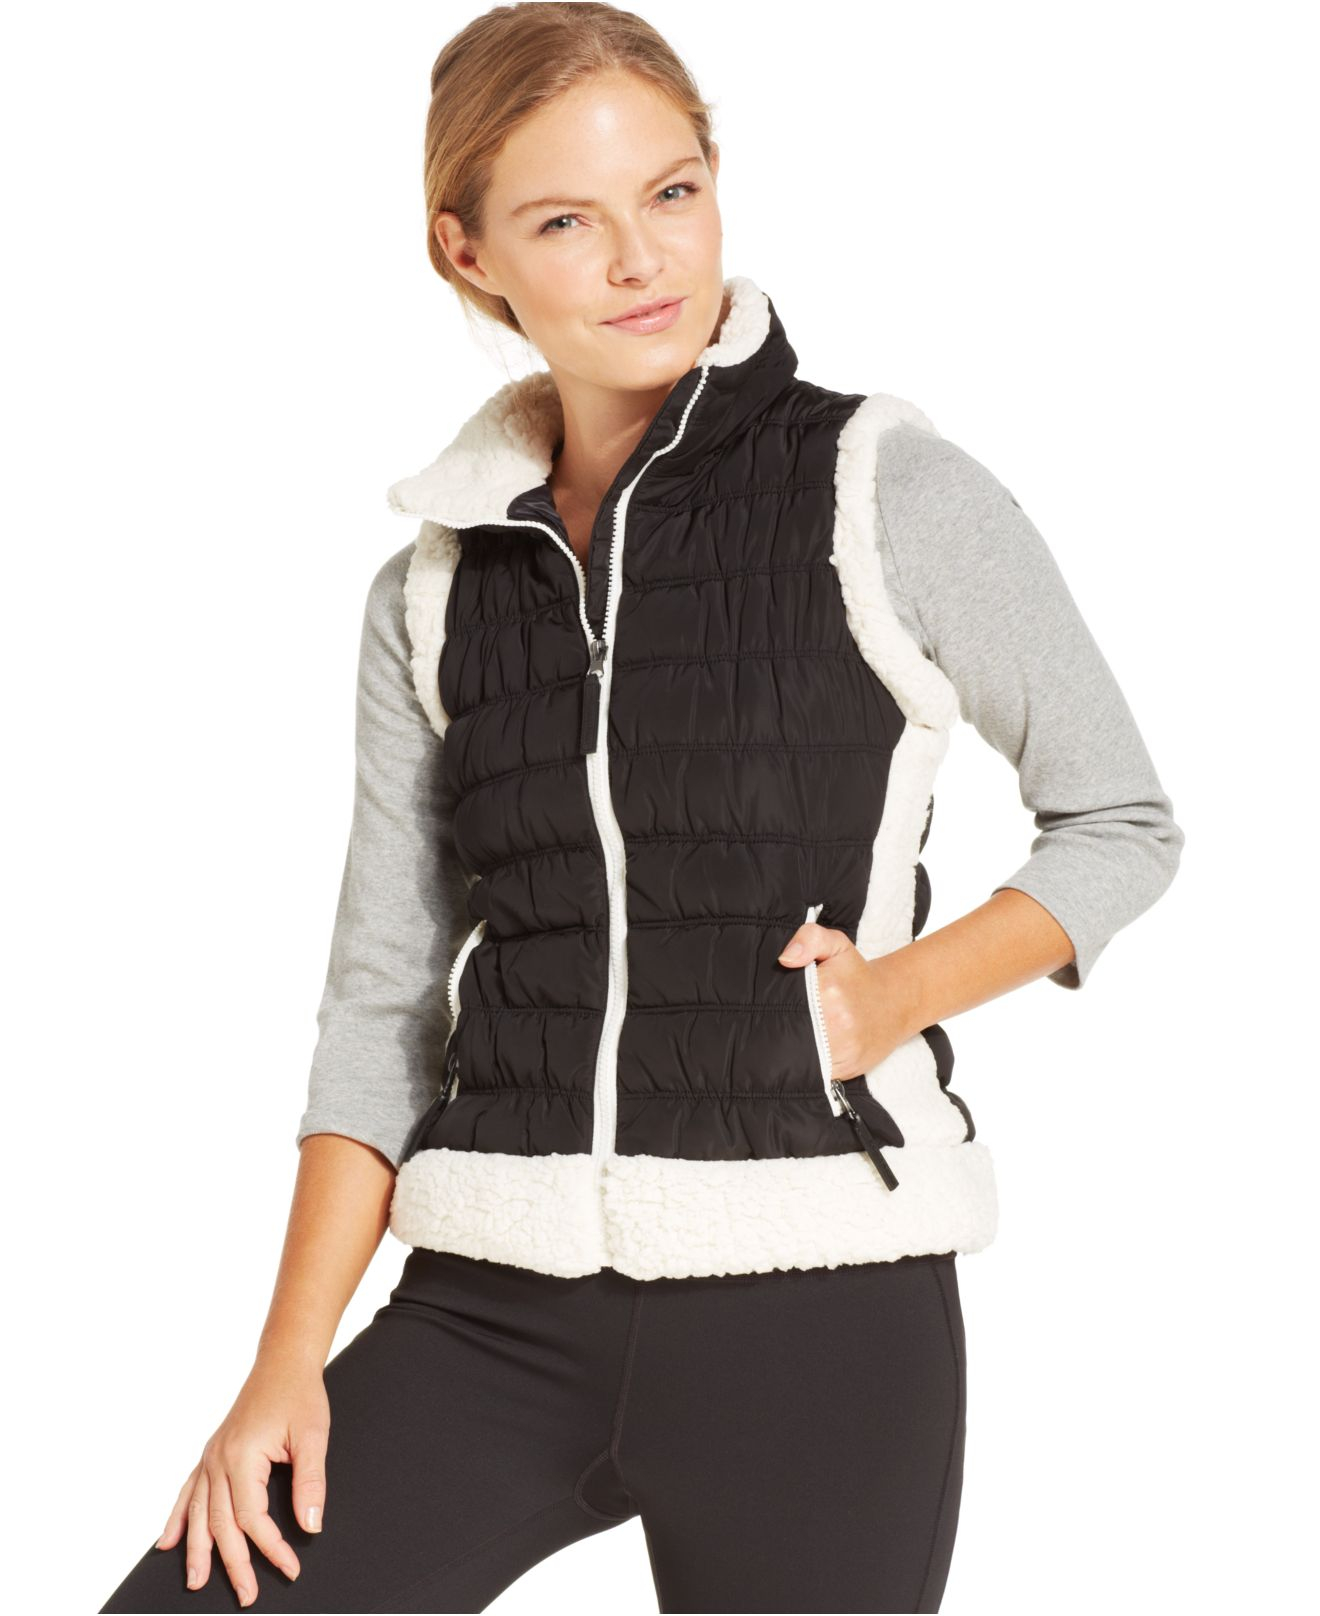 Lyst - Calvin klein Performance Sherpa-Trim Quilted Puffer Vest in White